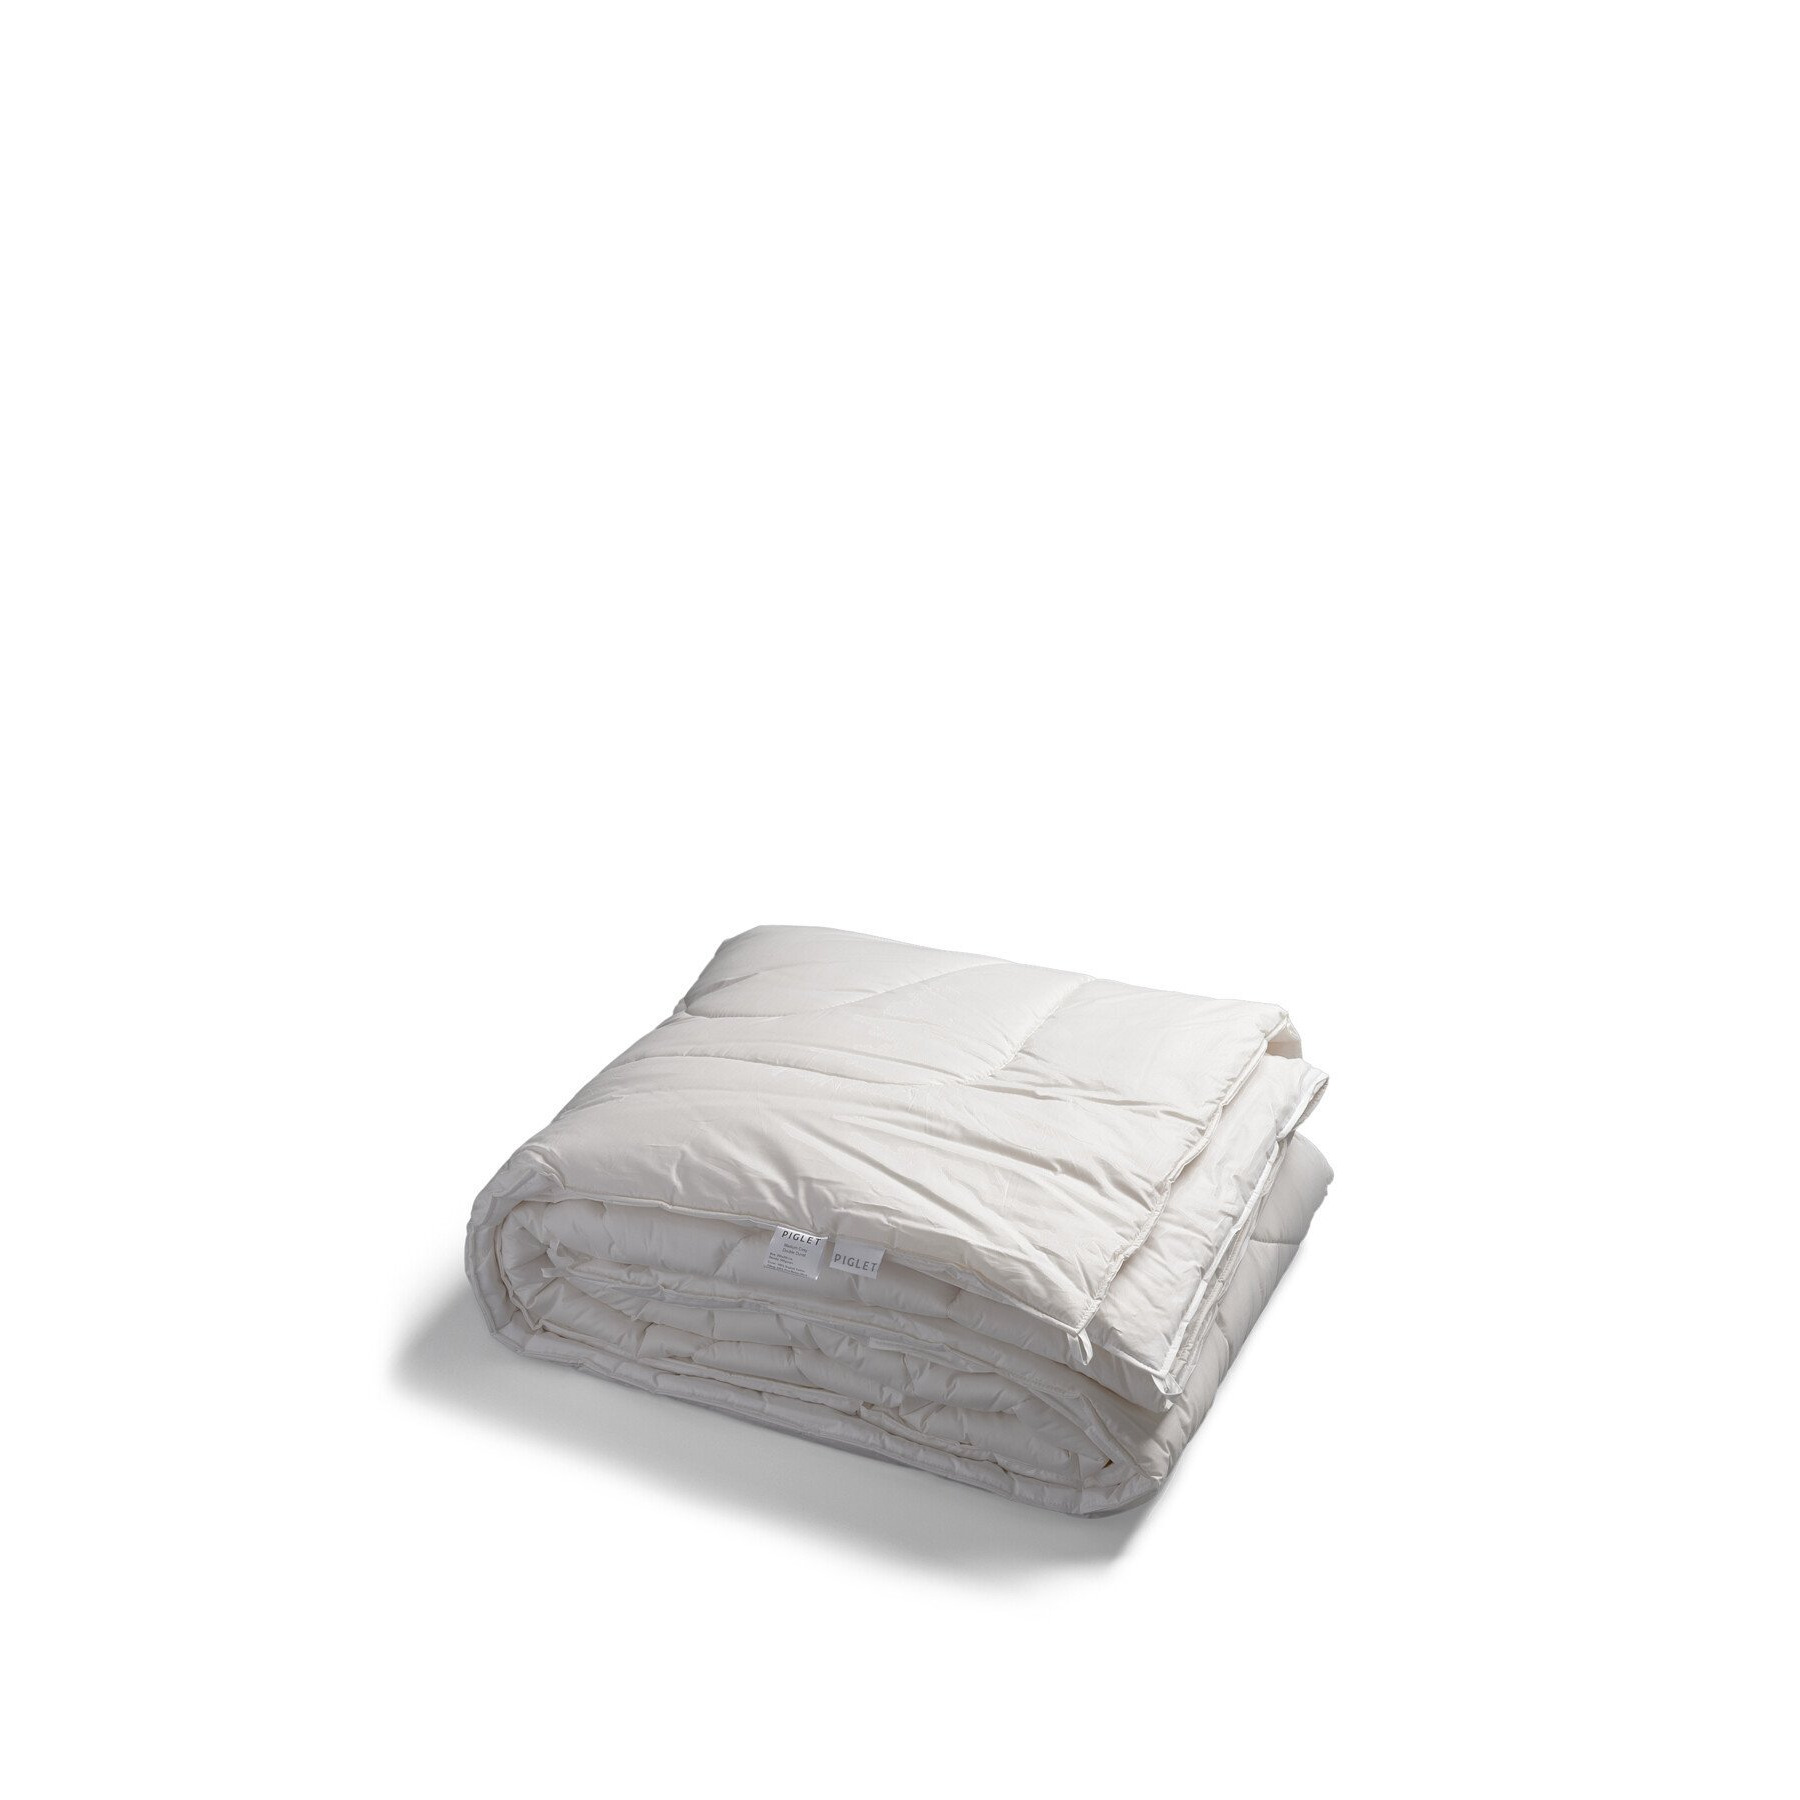 Piglet in Bed Wool Duvet Medium Weight - Size Double White - image 1